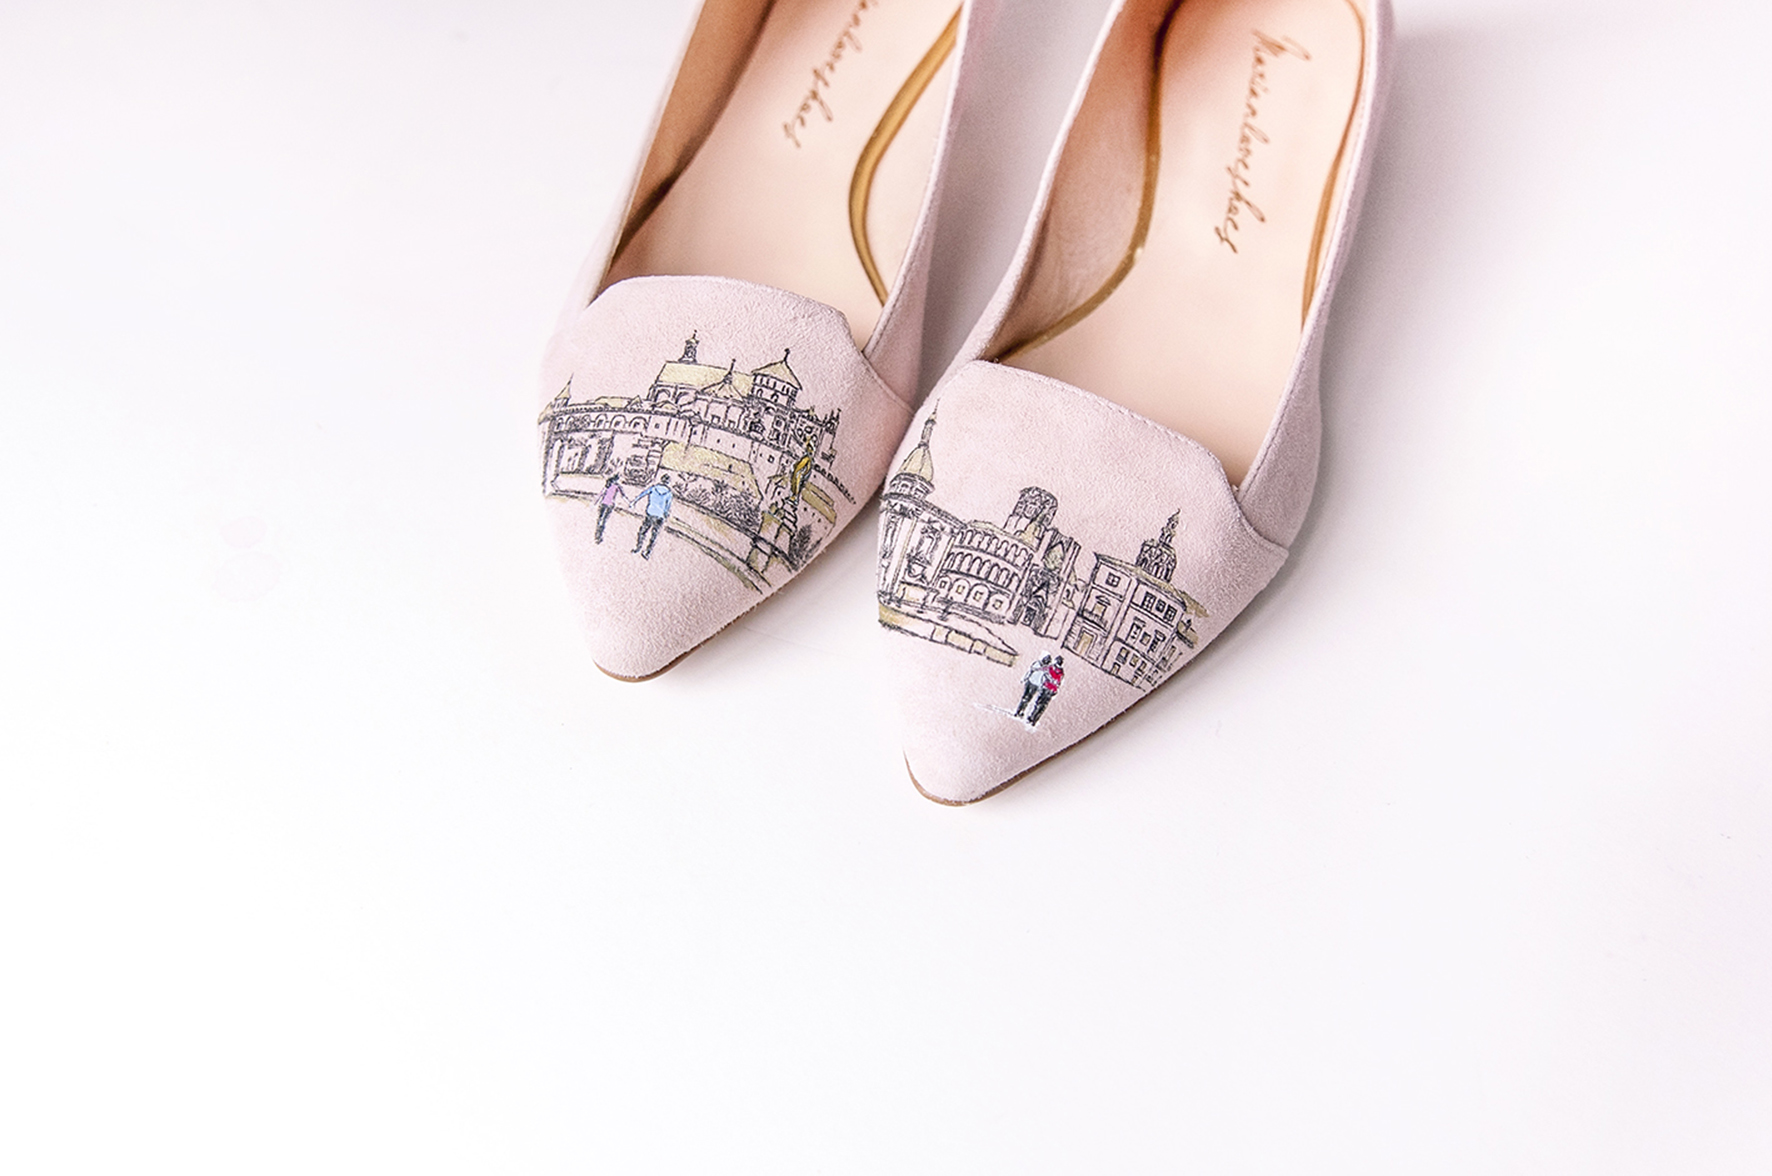 personalized-shoes-for-events-wedding-shoes-3